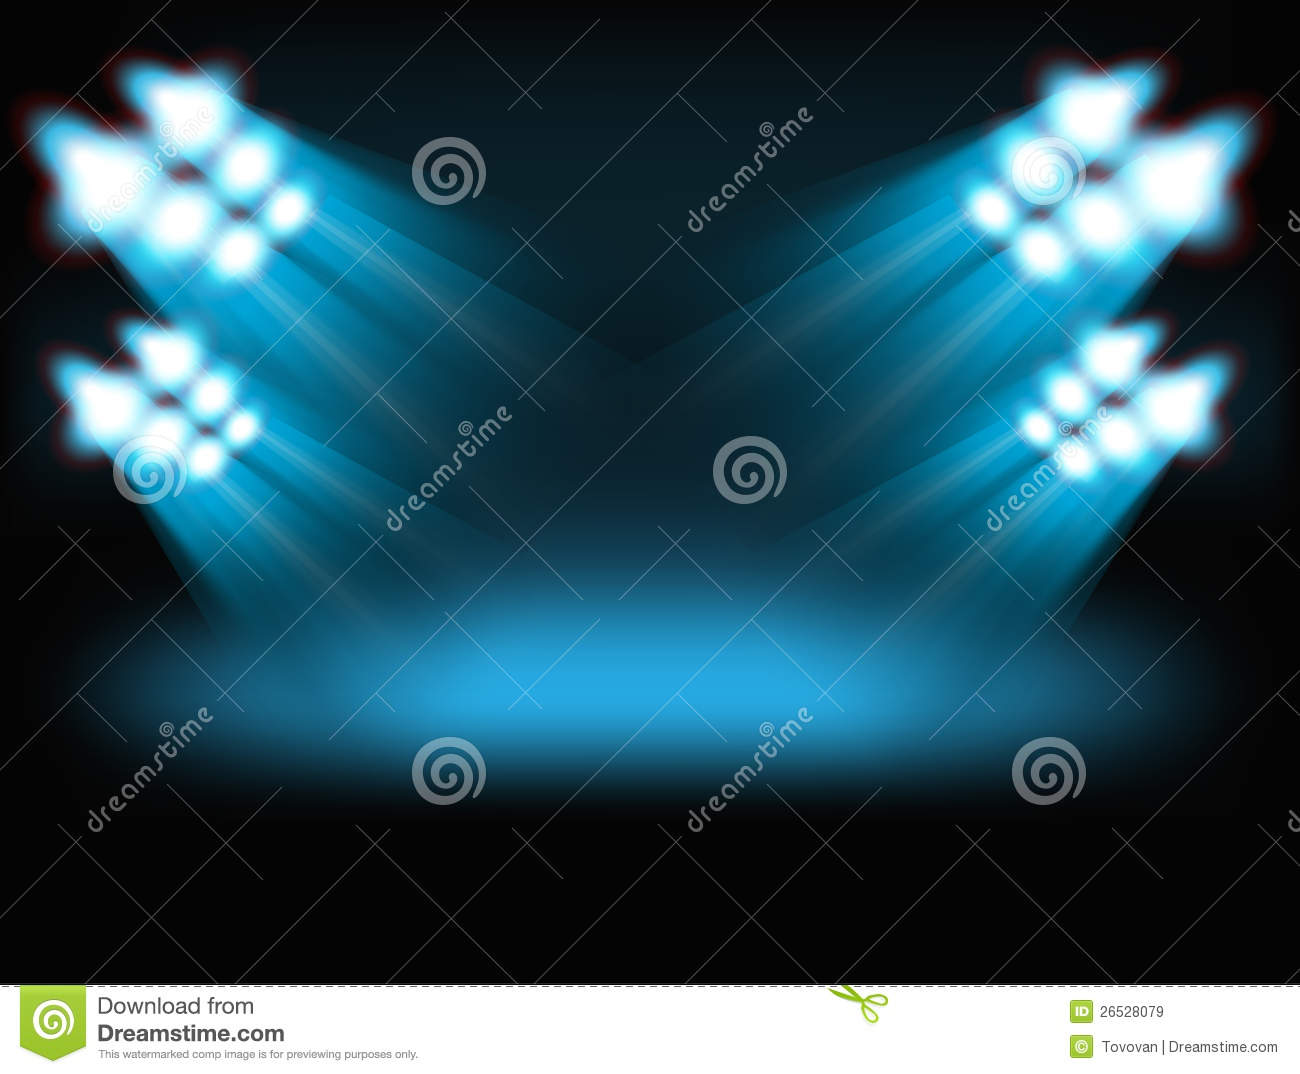 Bright Spot Lights Royalty Free Stock Images   Image  26528079